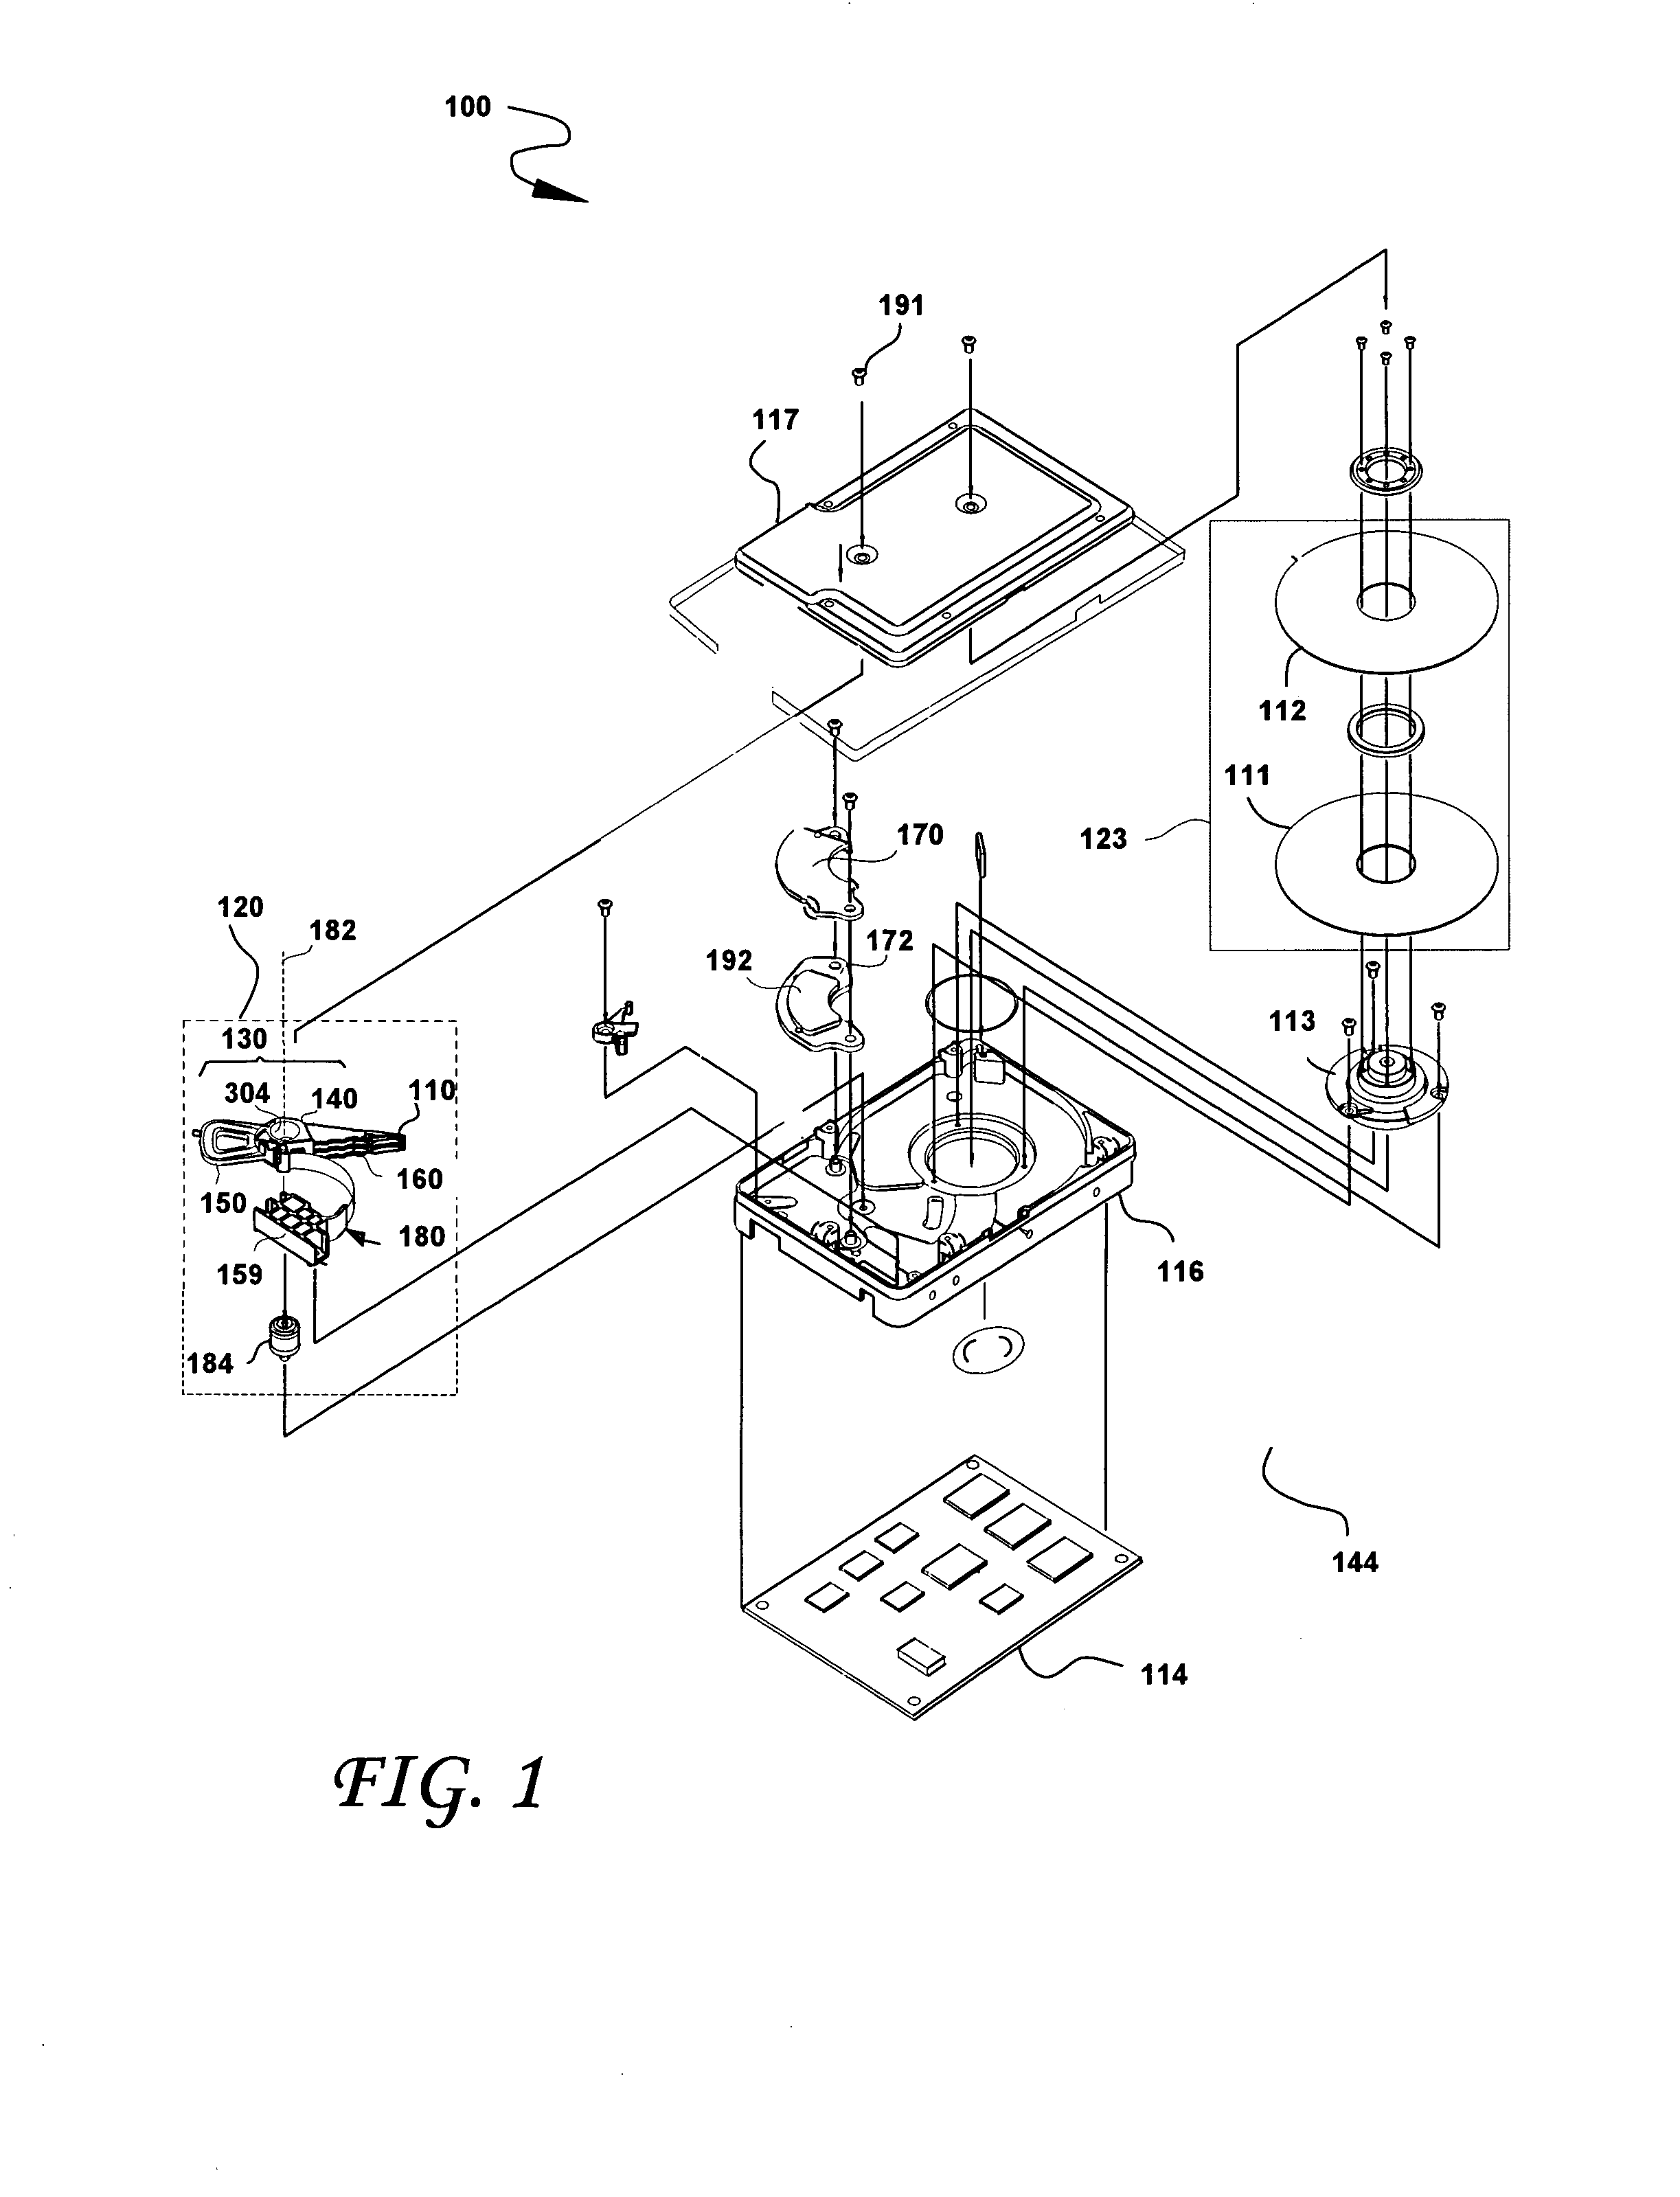 Head stack and actuator arm assemblies and disk drives having an actuator including an actuator arm spacer to increase actuator and suspension stiffness and to reduce the number of actuator arm resonance modes